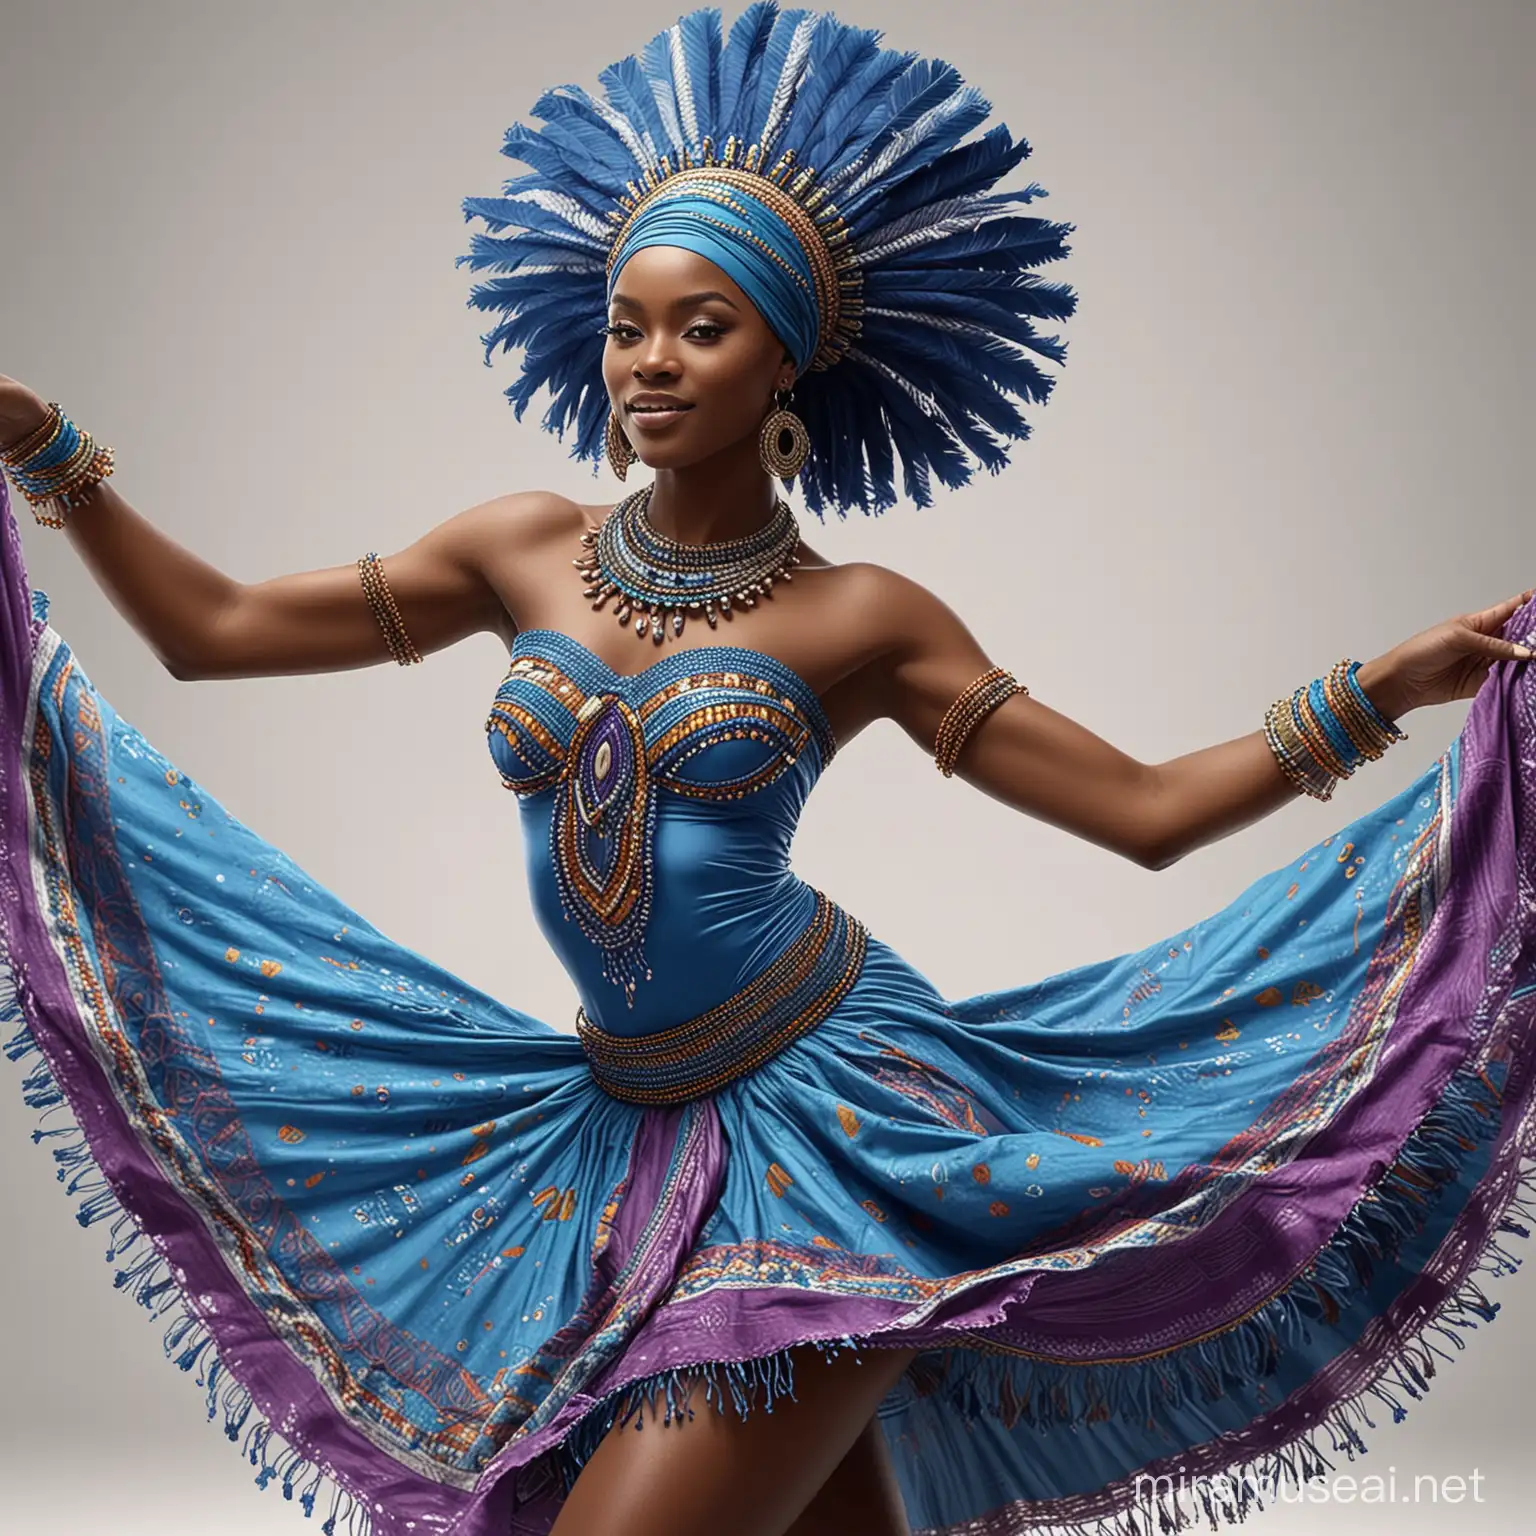 Create a lively and dynamic vector illustration of an African dancer in motion. The dancer should have a lean, muscular build, and the skin tone should be a rich, dark brown. The figure is captured in mid-dance, with one arm extended upward and the other gracefully positioned. The dancer's attire includes a colorful, traditional African costume with bright purple, silver, and blue hues, accented with patterns and fringes that convey movement. The dancer should also be adorned with cultural accessories like beaded necklaces, bracelets, and a headband. The background should be plain white to emphasize the vibrancy and energy of the dancer's pose and costume. The artwork should exude a sense of rhythm and celebration of African dance heritage, depicted in a stylized, exaggerated form to showcase the beauty of the culture's artistic expression, 32k render, hyperrealistic, detailed.